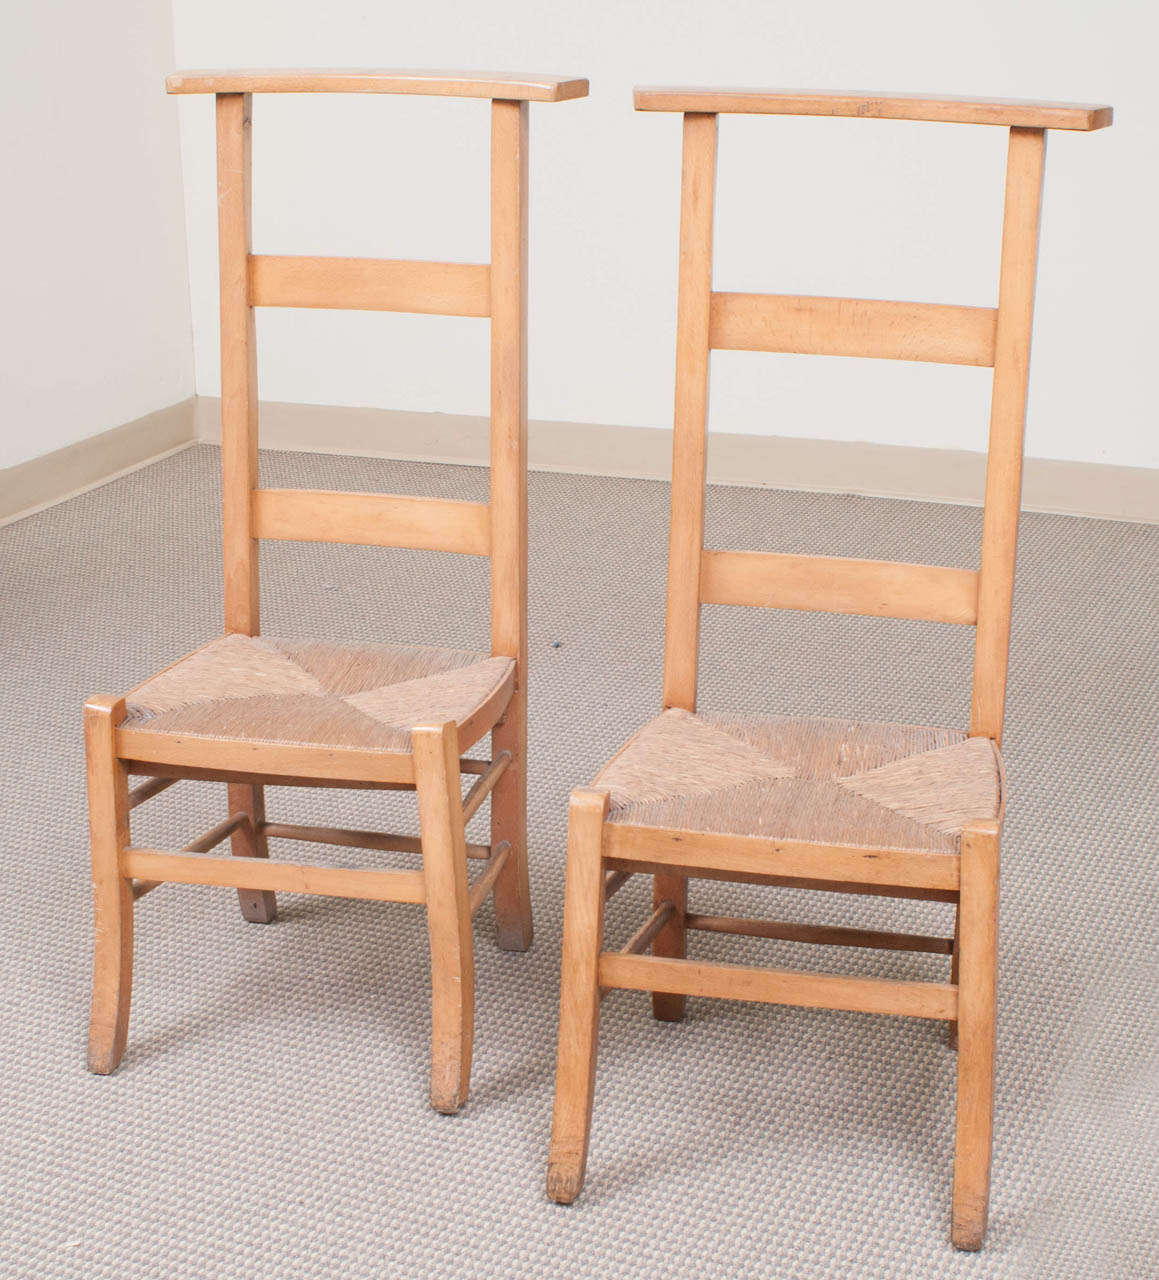 A pair of beechwood prayer chairs in exceptional condition featuring sabre legs and a woven rush seat.